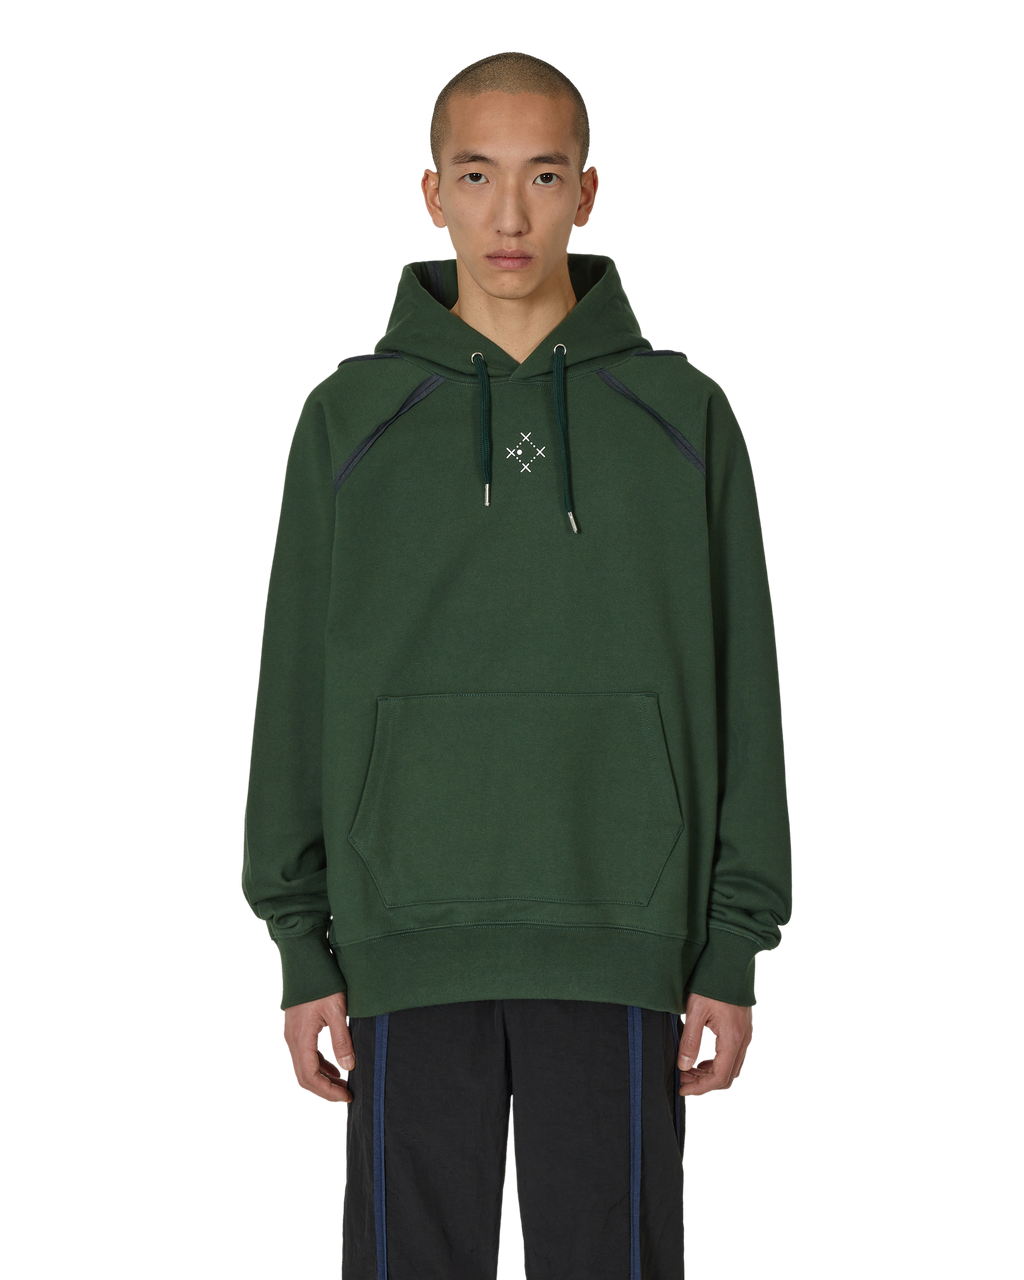 _J.L - A.L_ _J.L-A.L_ x Sound Sports Hoodie J297462-S-Green front